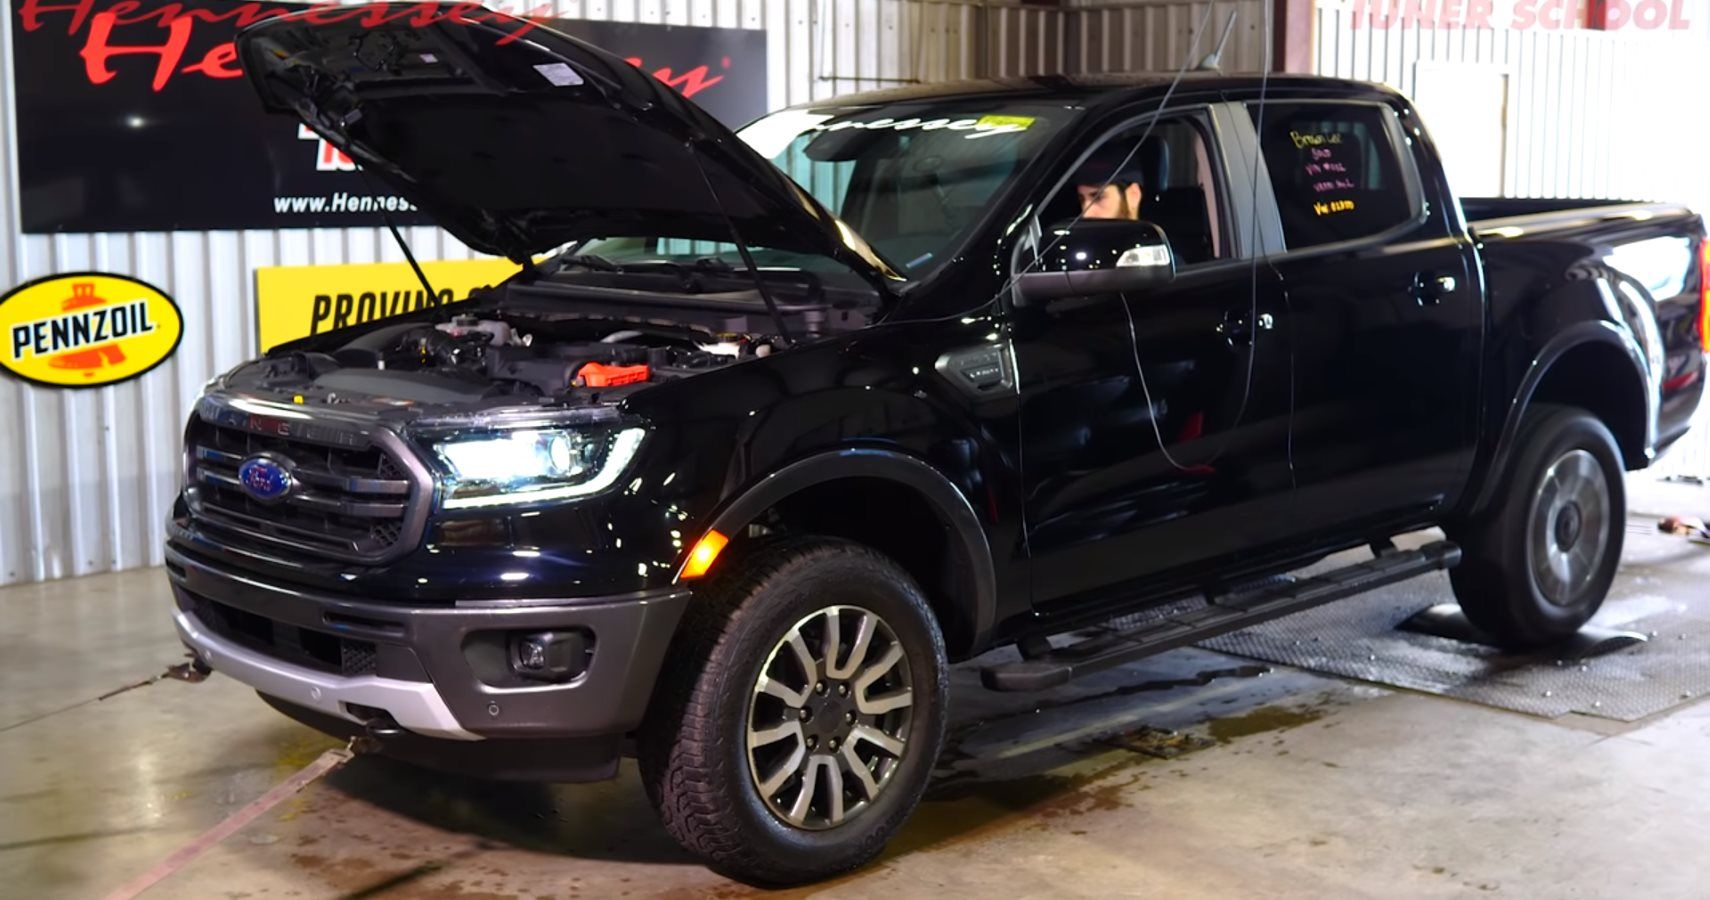 See How Much Horsepower The New Hennessey VelociRaptor Ranger Really Puts Down